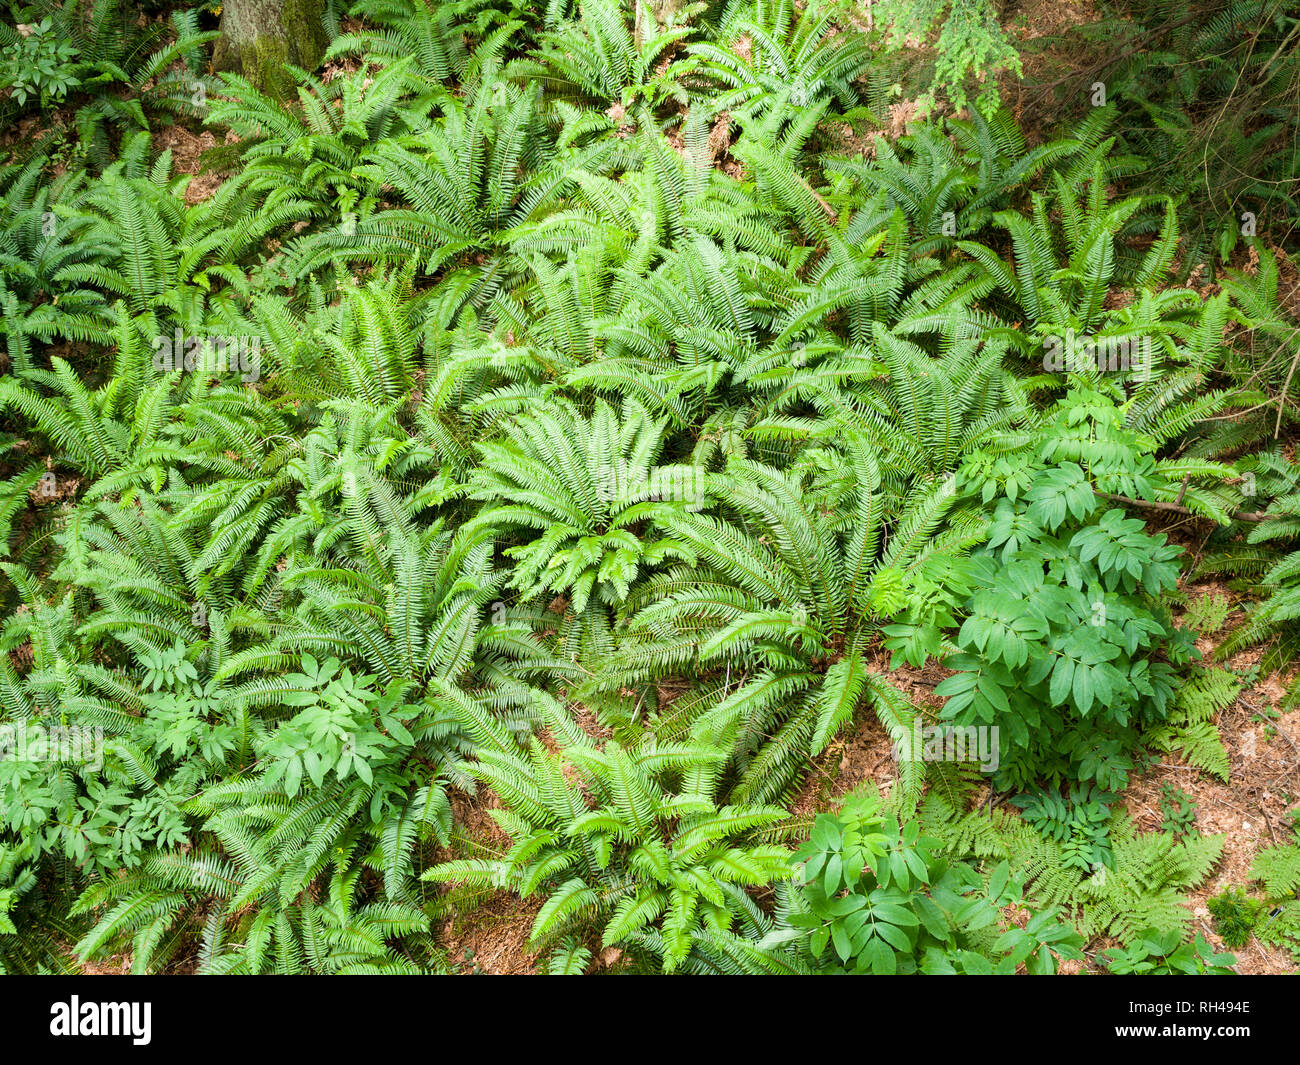 Forest Floor Ferns from Above: A cluster of bright green ferns and other understory plants in a temperate coastal rain forest. Stock Photo